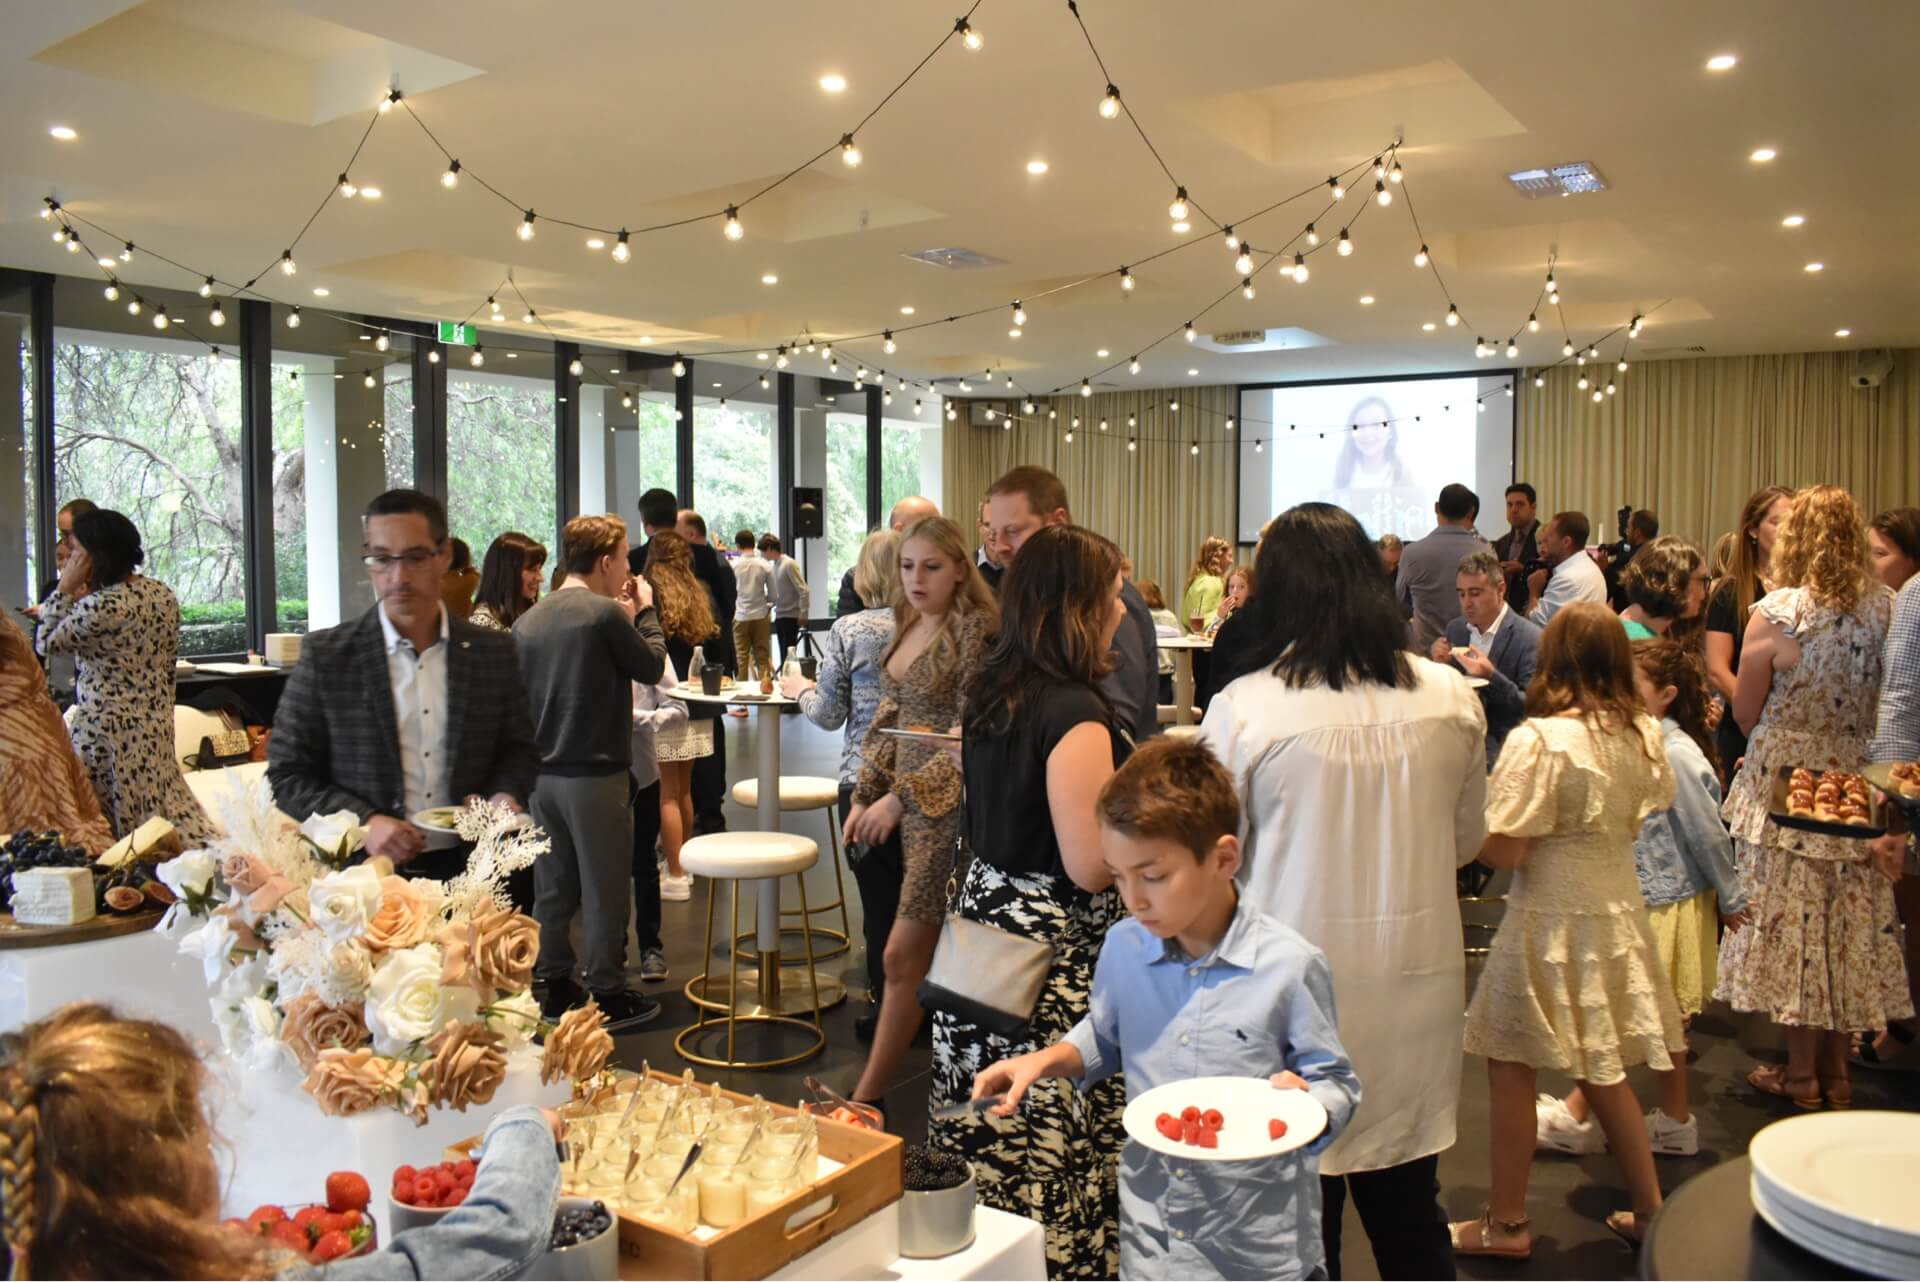 A bustling crowd gathers around a lavish buffet table at Leonda by the Yarra. Food galore and happy faces!